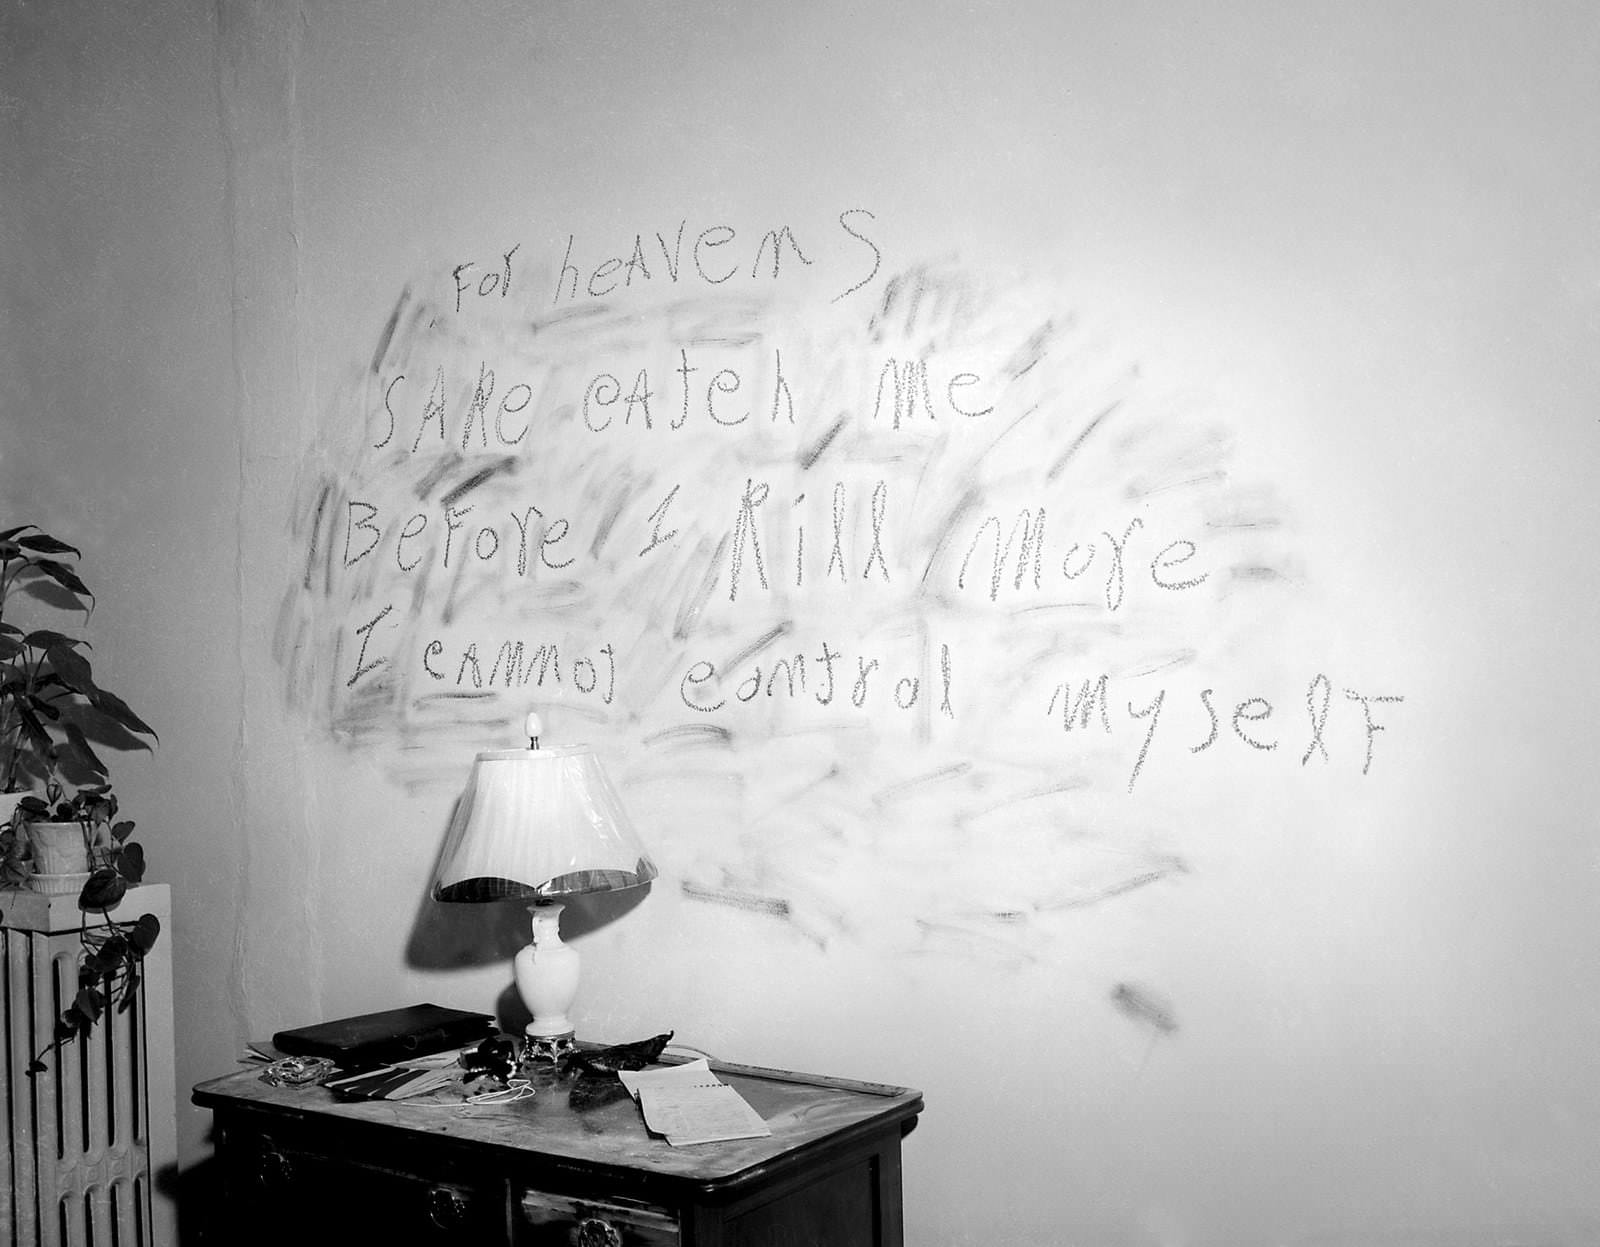 The childlike scrawl which reads, “For heavens sake catch me before I kill more. I cannot control myself,” written by the Lipstick Killer in 1946